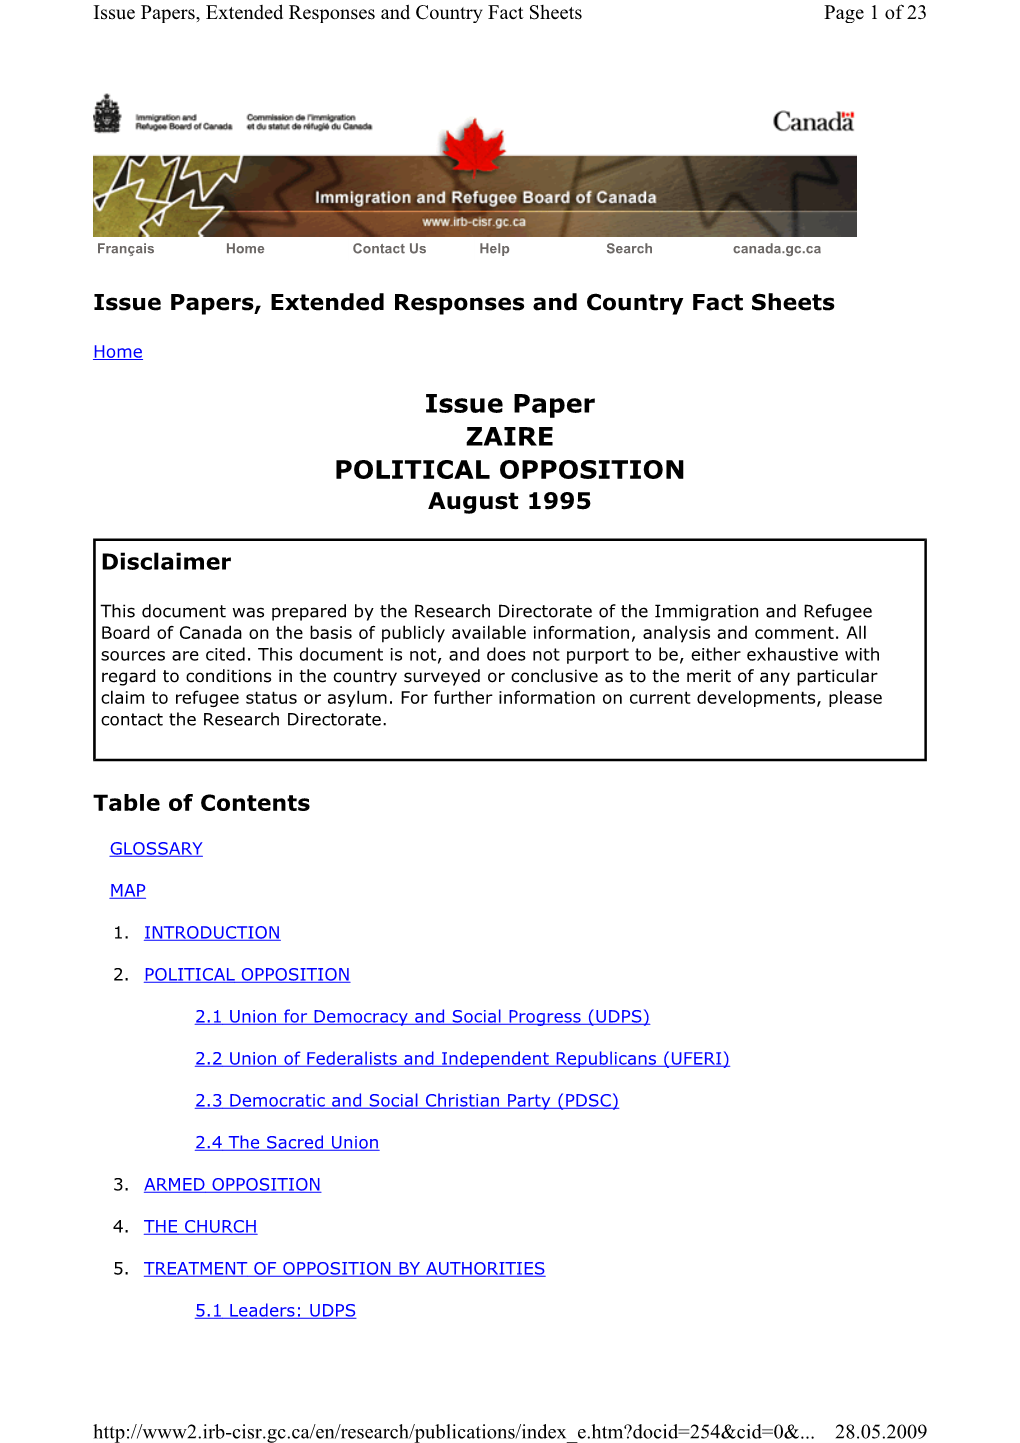 Issue Paper ZAIRE POLITICAL OPPOSITION August 1995